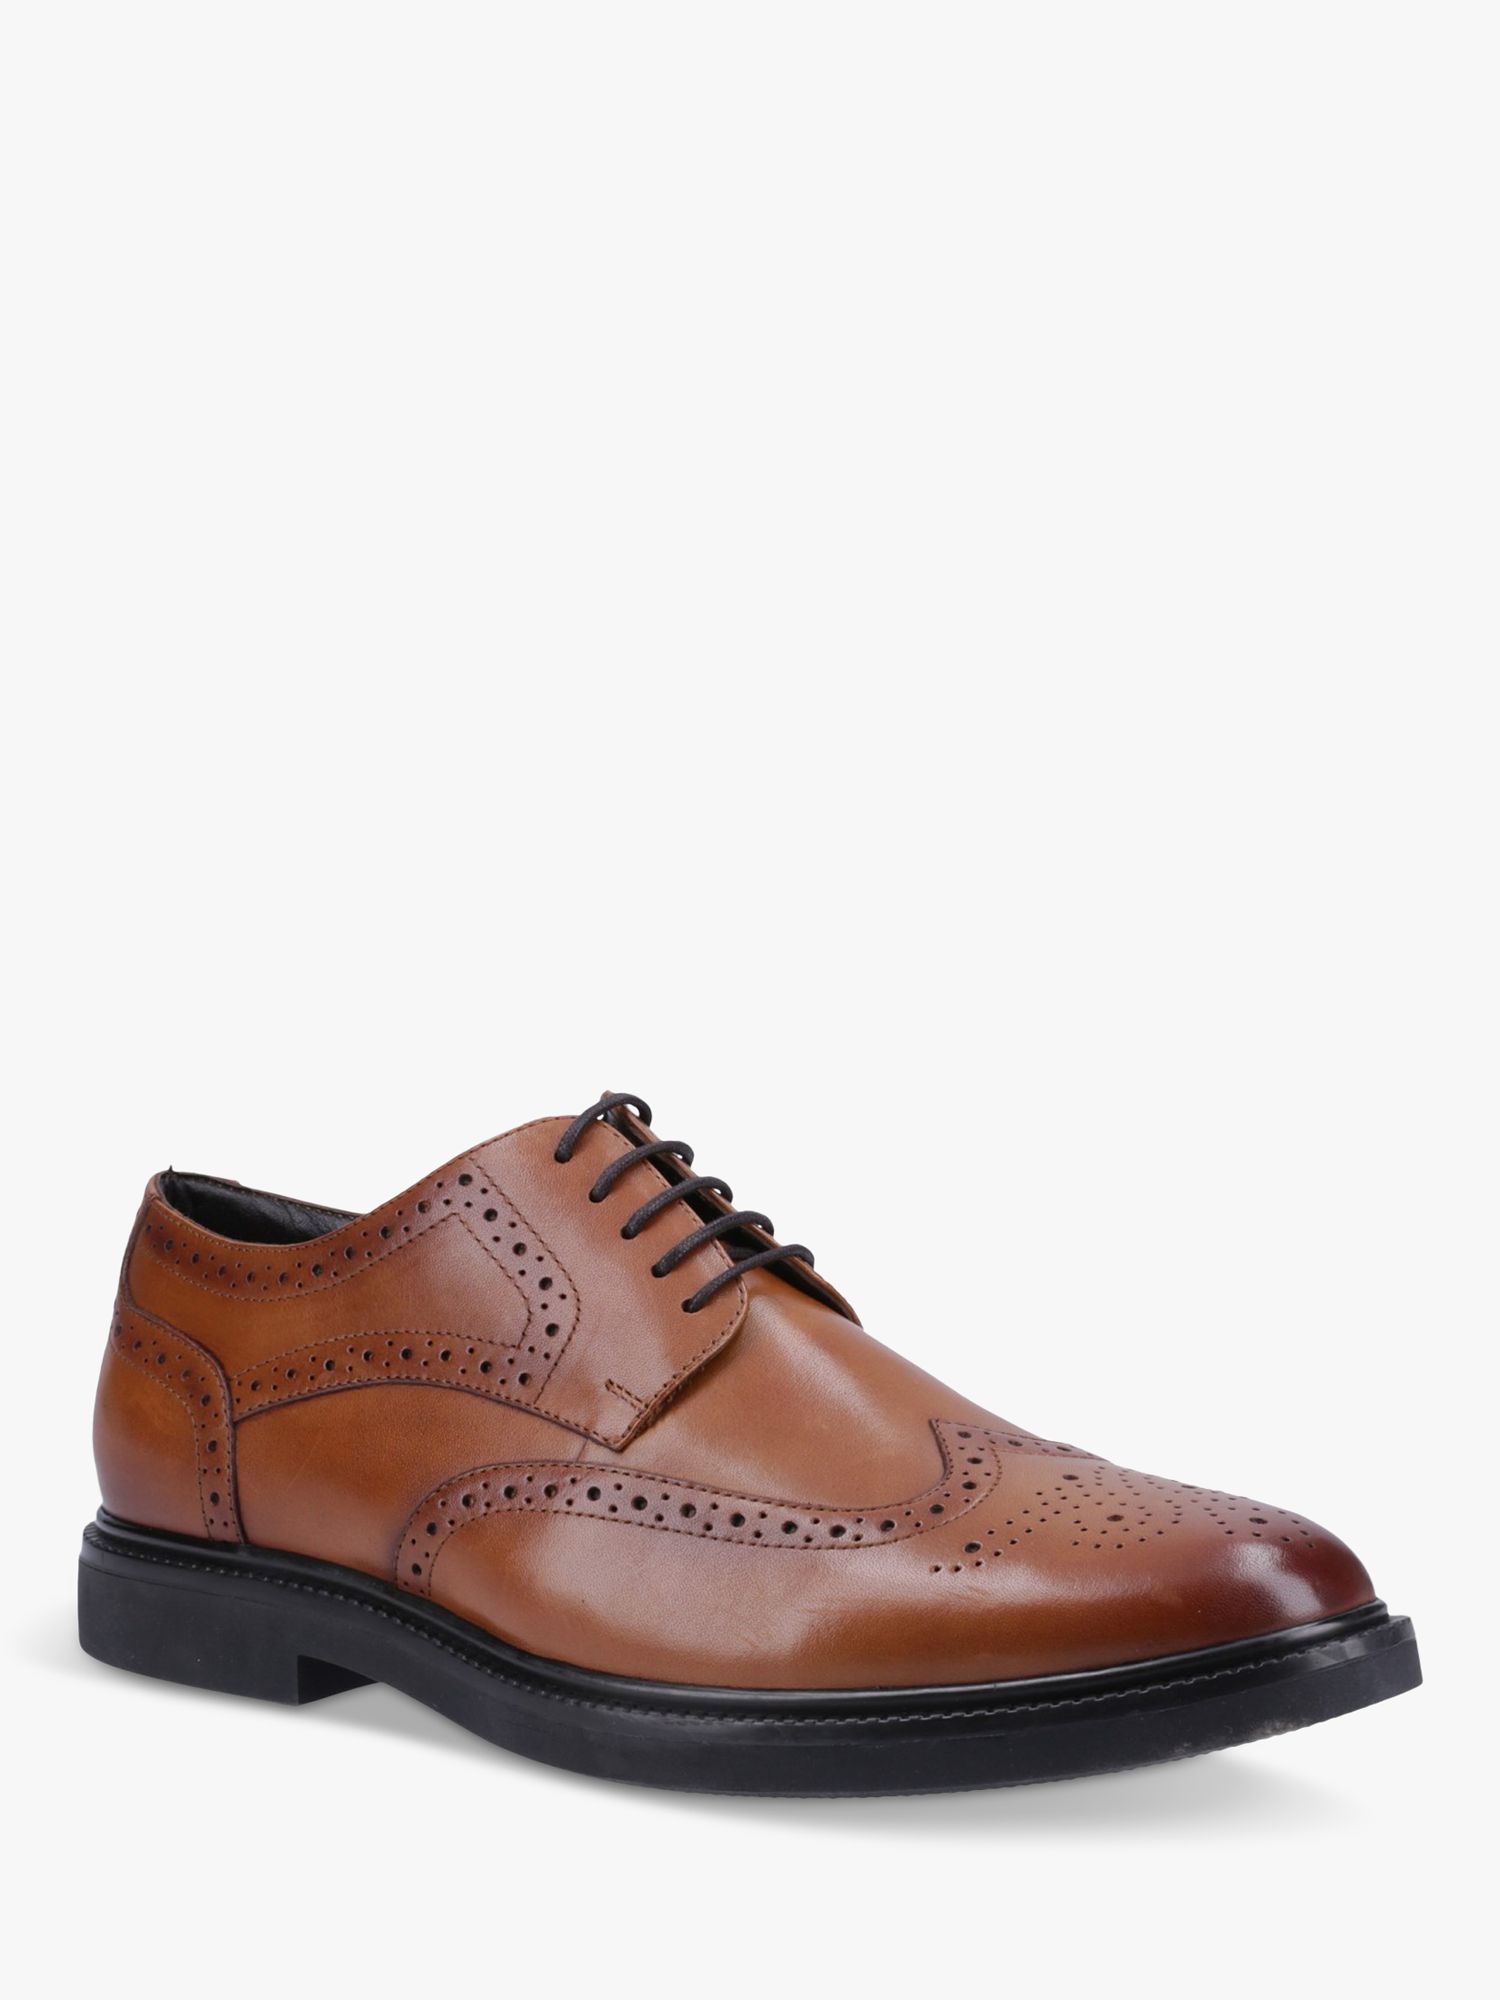 Buy Hush Puppies Kingston Brogue Leather Shoes, Tan Online at johnlewis.com